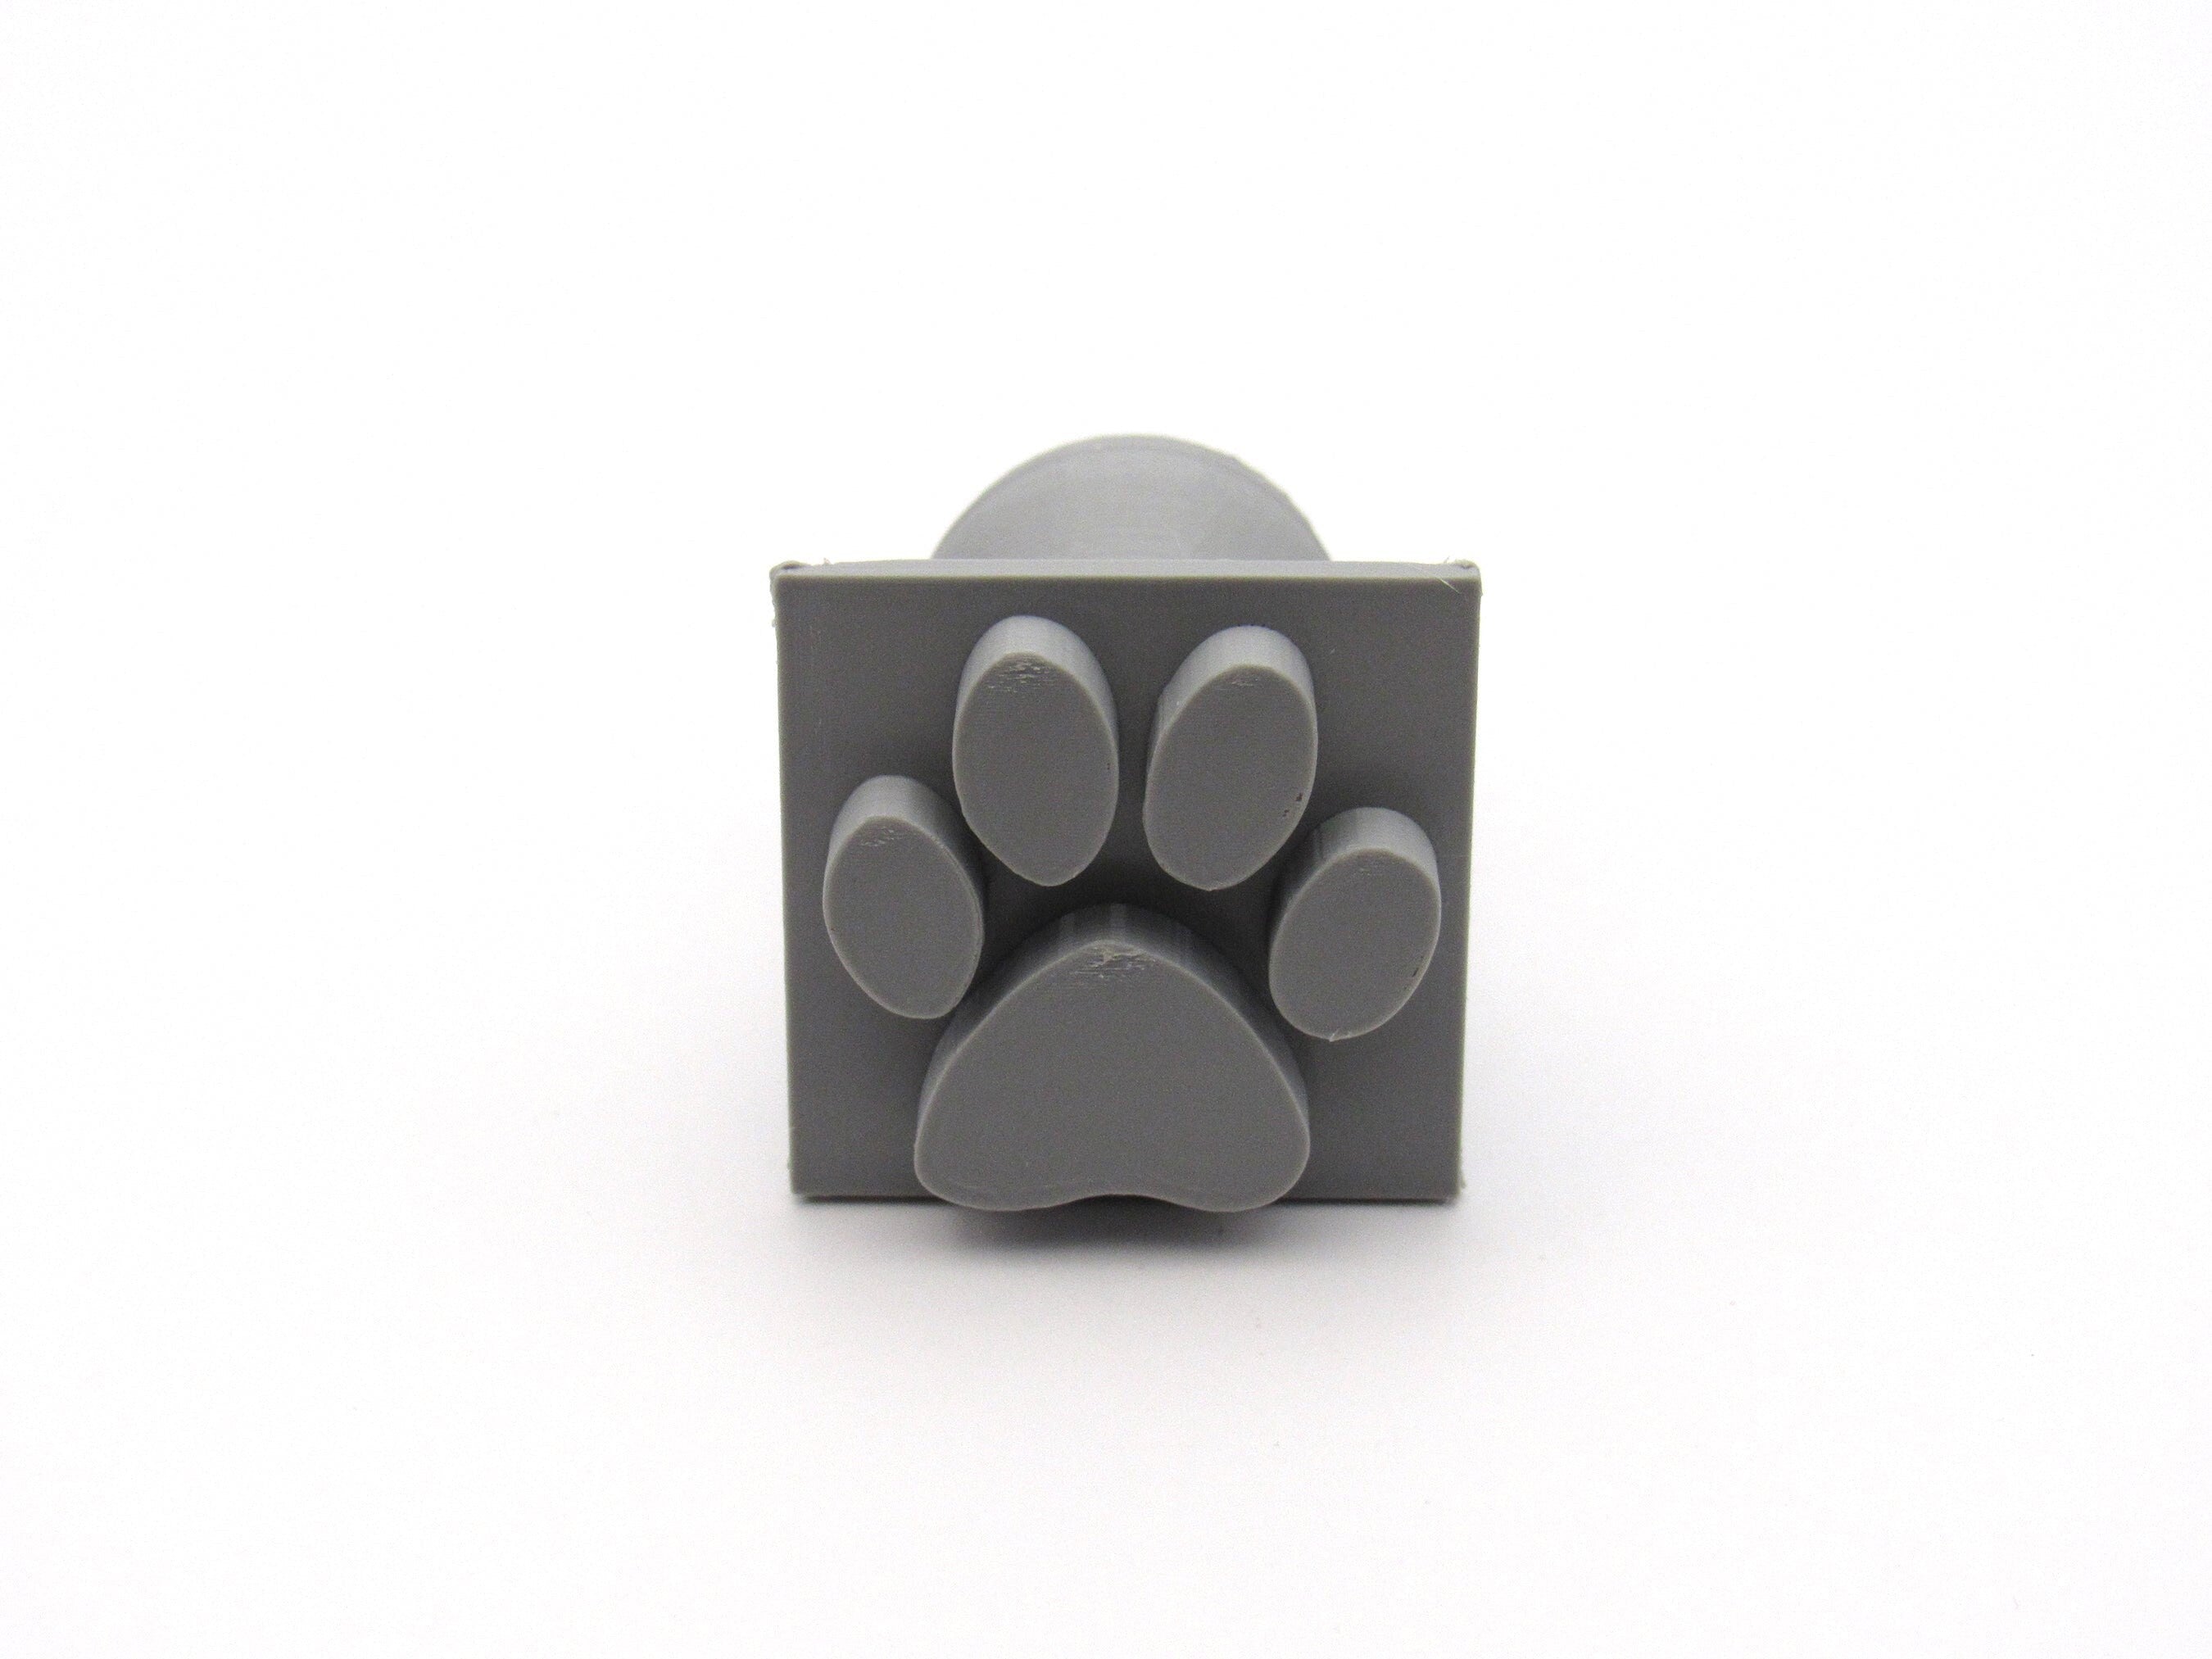 Paw Print Square Stamp with Cutter - square pendant stamp with cutter Square pendant - A Mayes Pottery